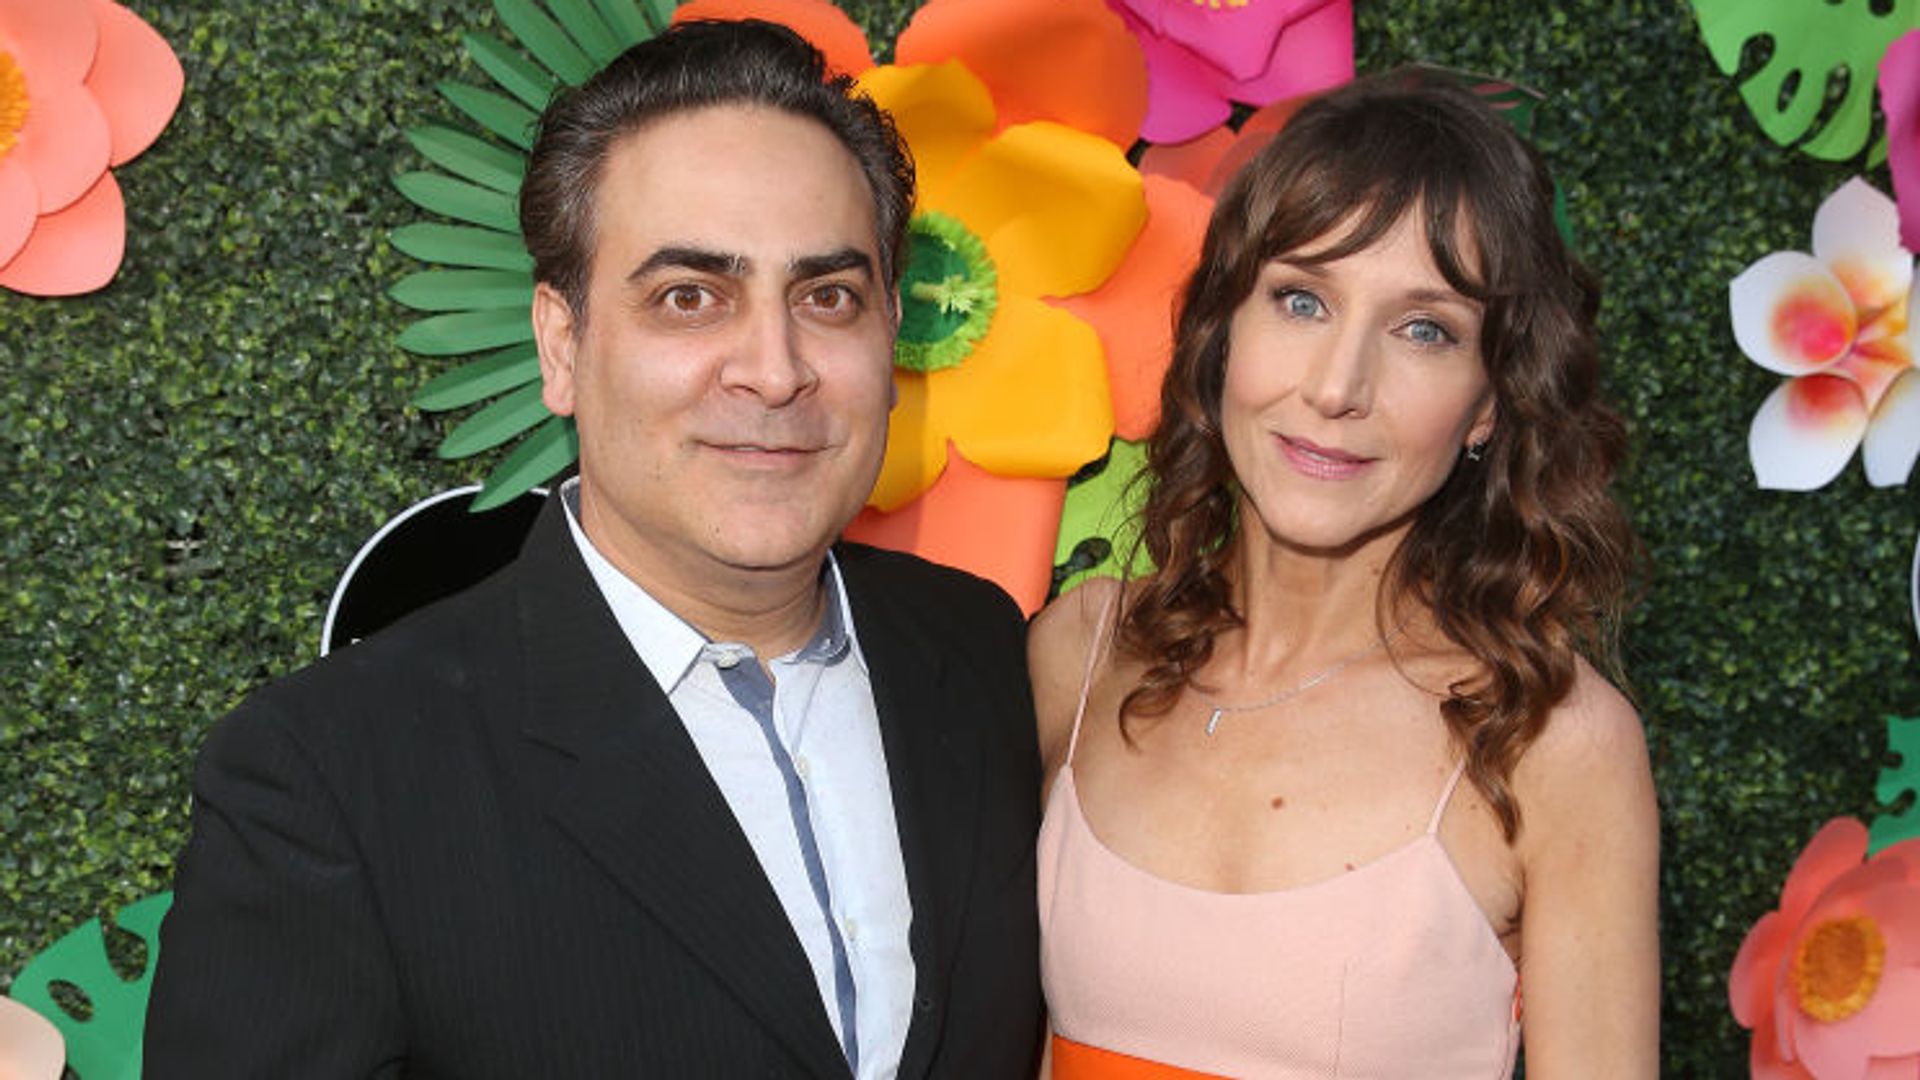 Jason Antoon and Seana Kofoed attend the Lifetime Summer Luau on May 20, 2019 in Los Angeles